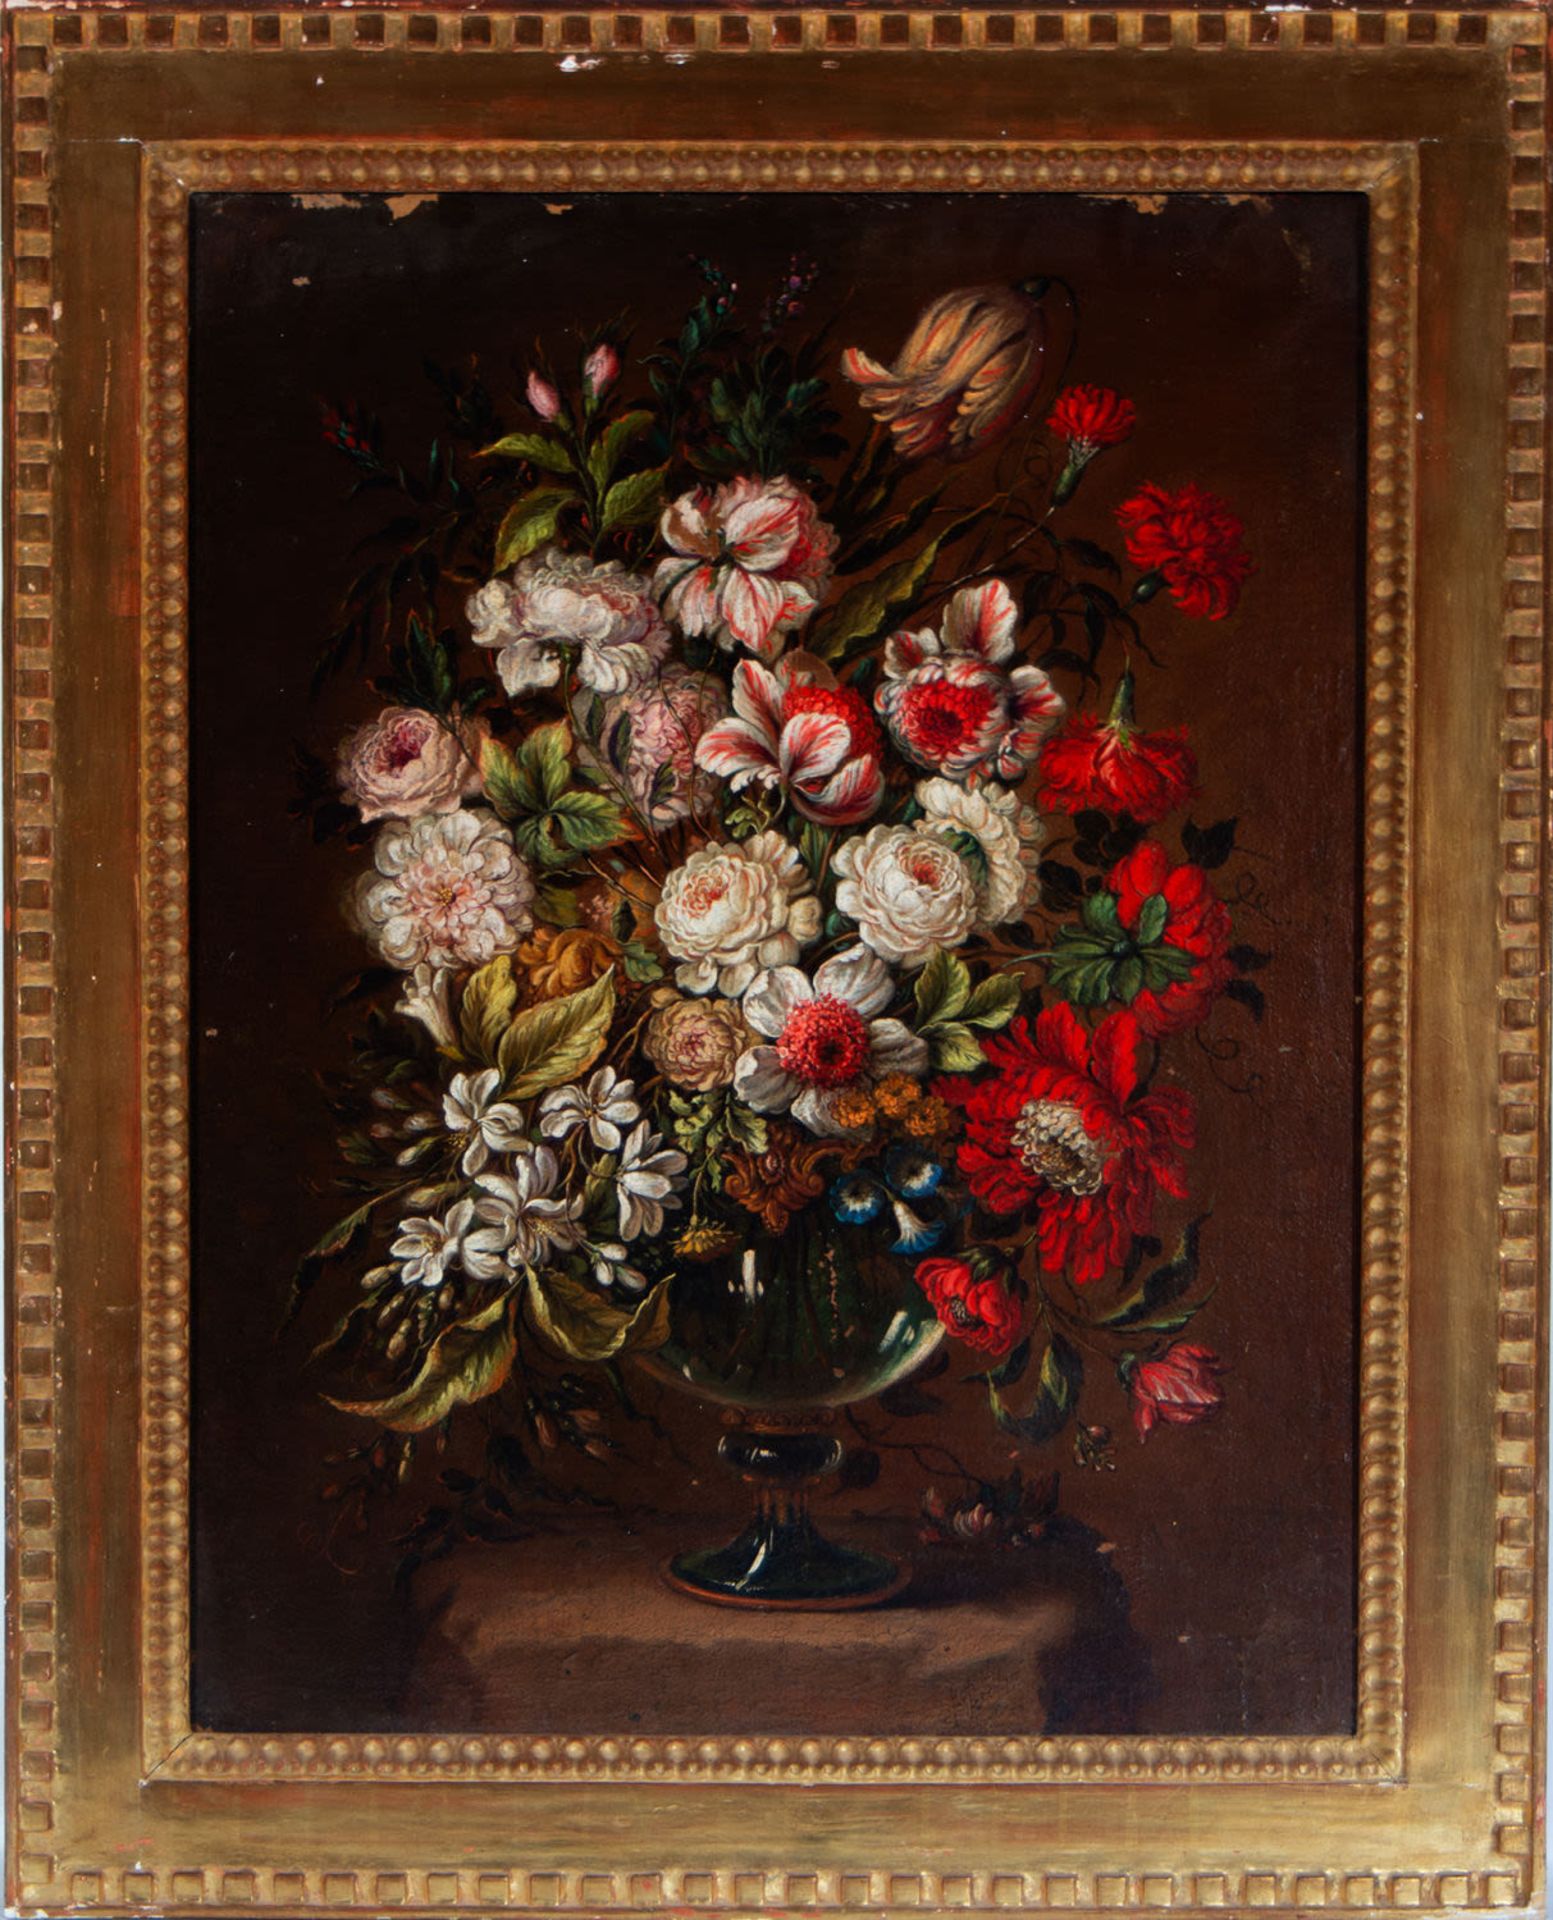 Pair of large still lifes of Flowers, Dutch school of the 17th - 18th century - Image 2 of 20